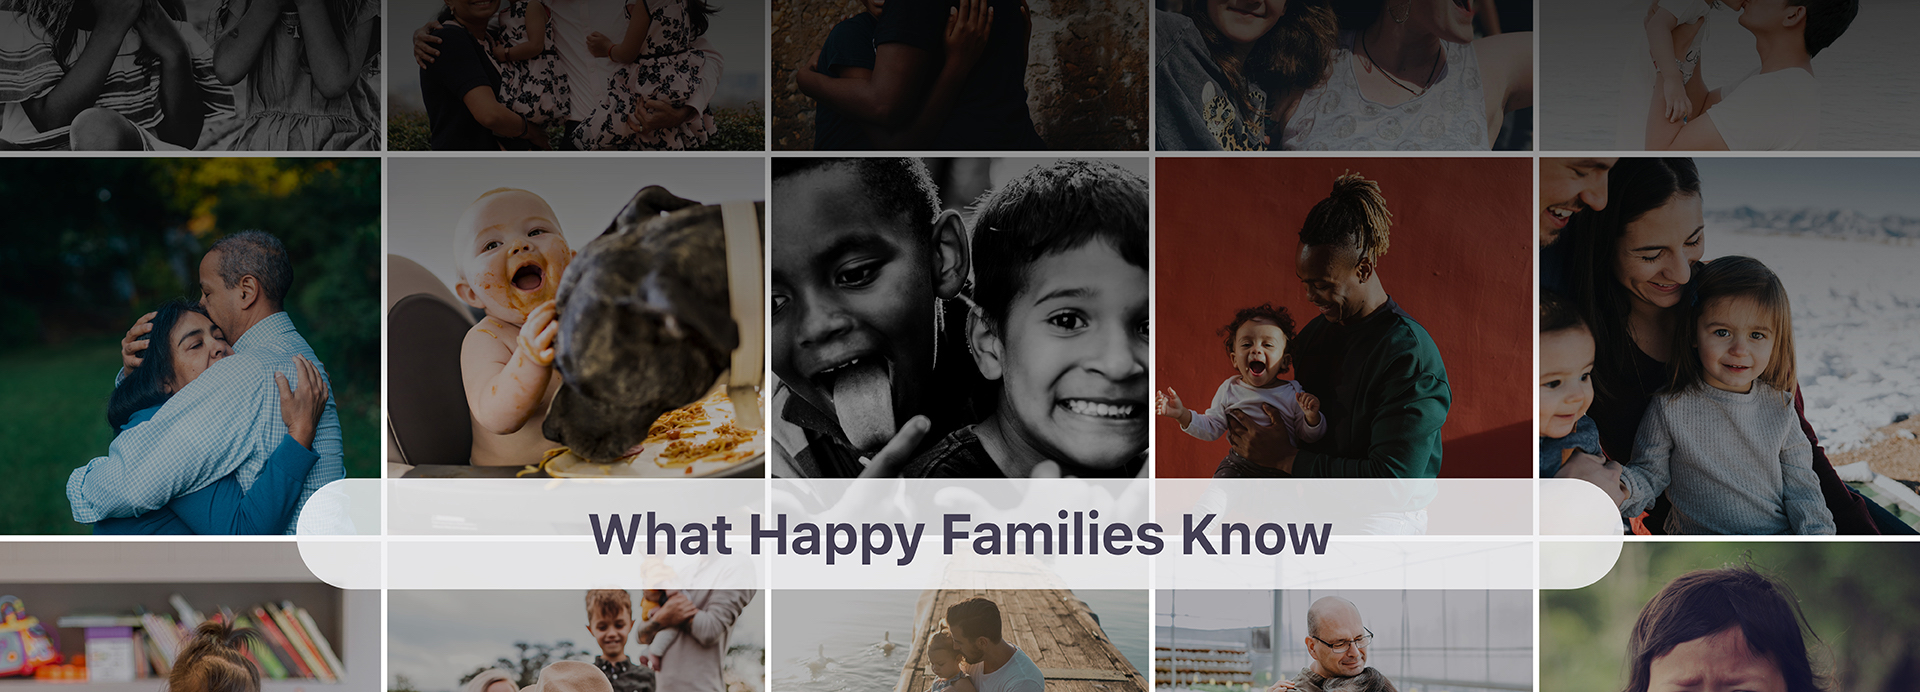 What Happy Families Know